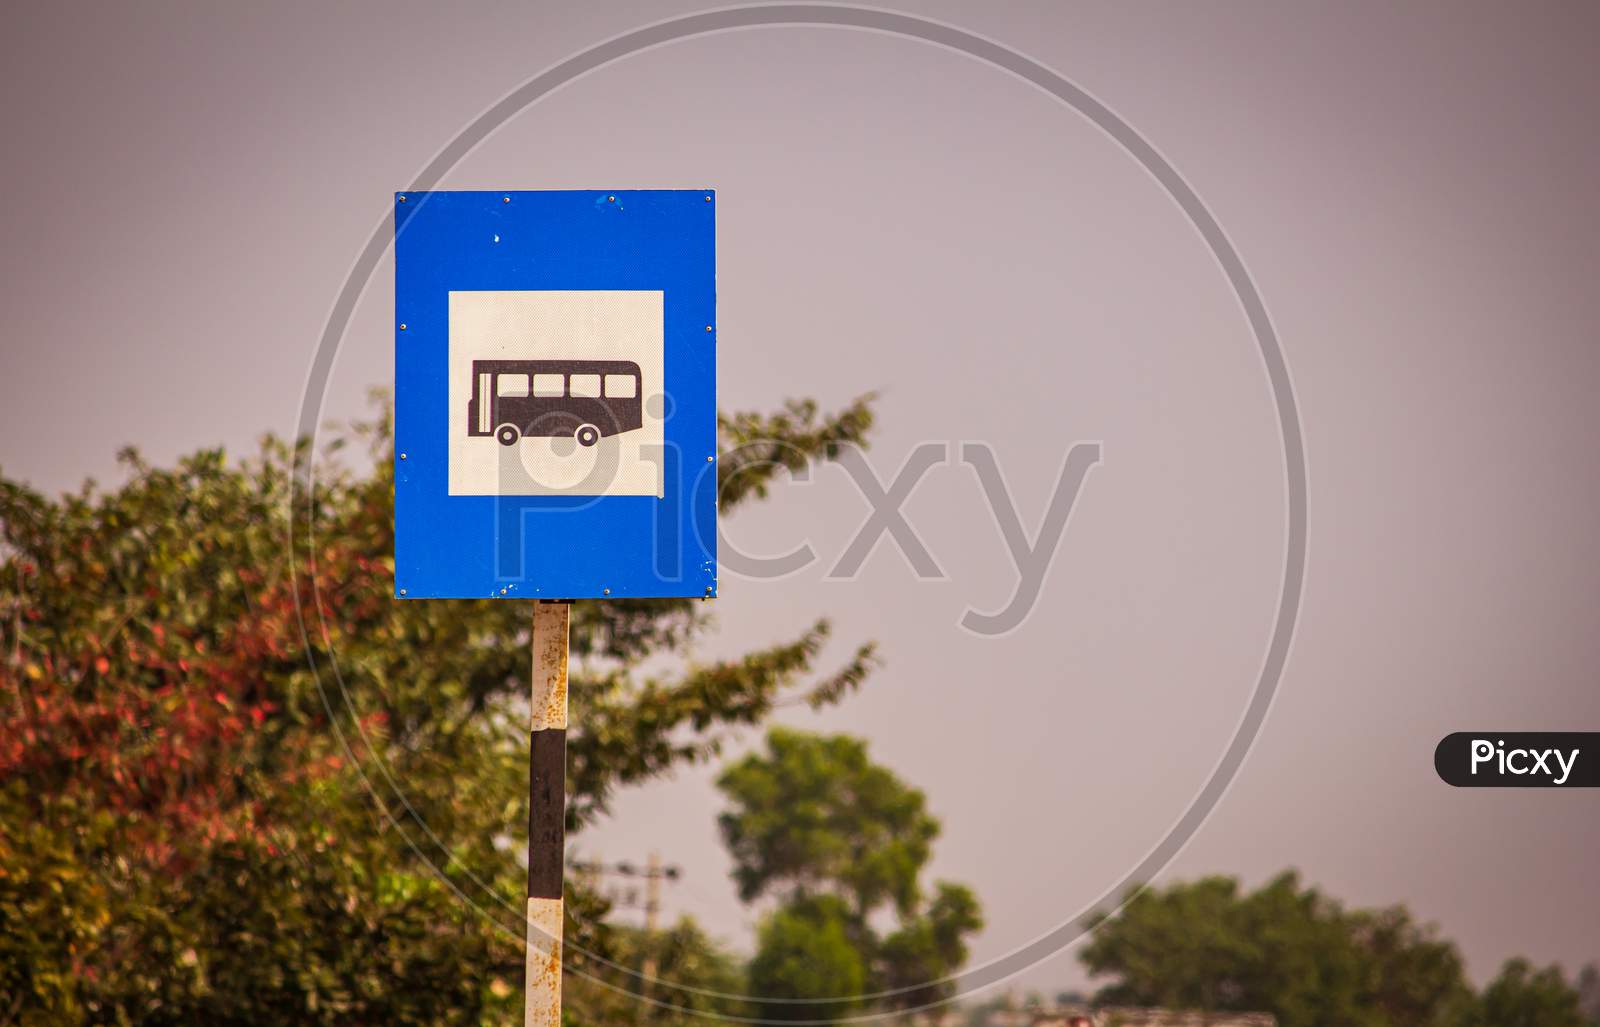 Informatory Sign Denoting Bus Top Ahead For Passengers To Board Along The Roadside